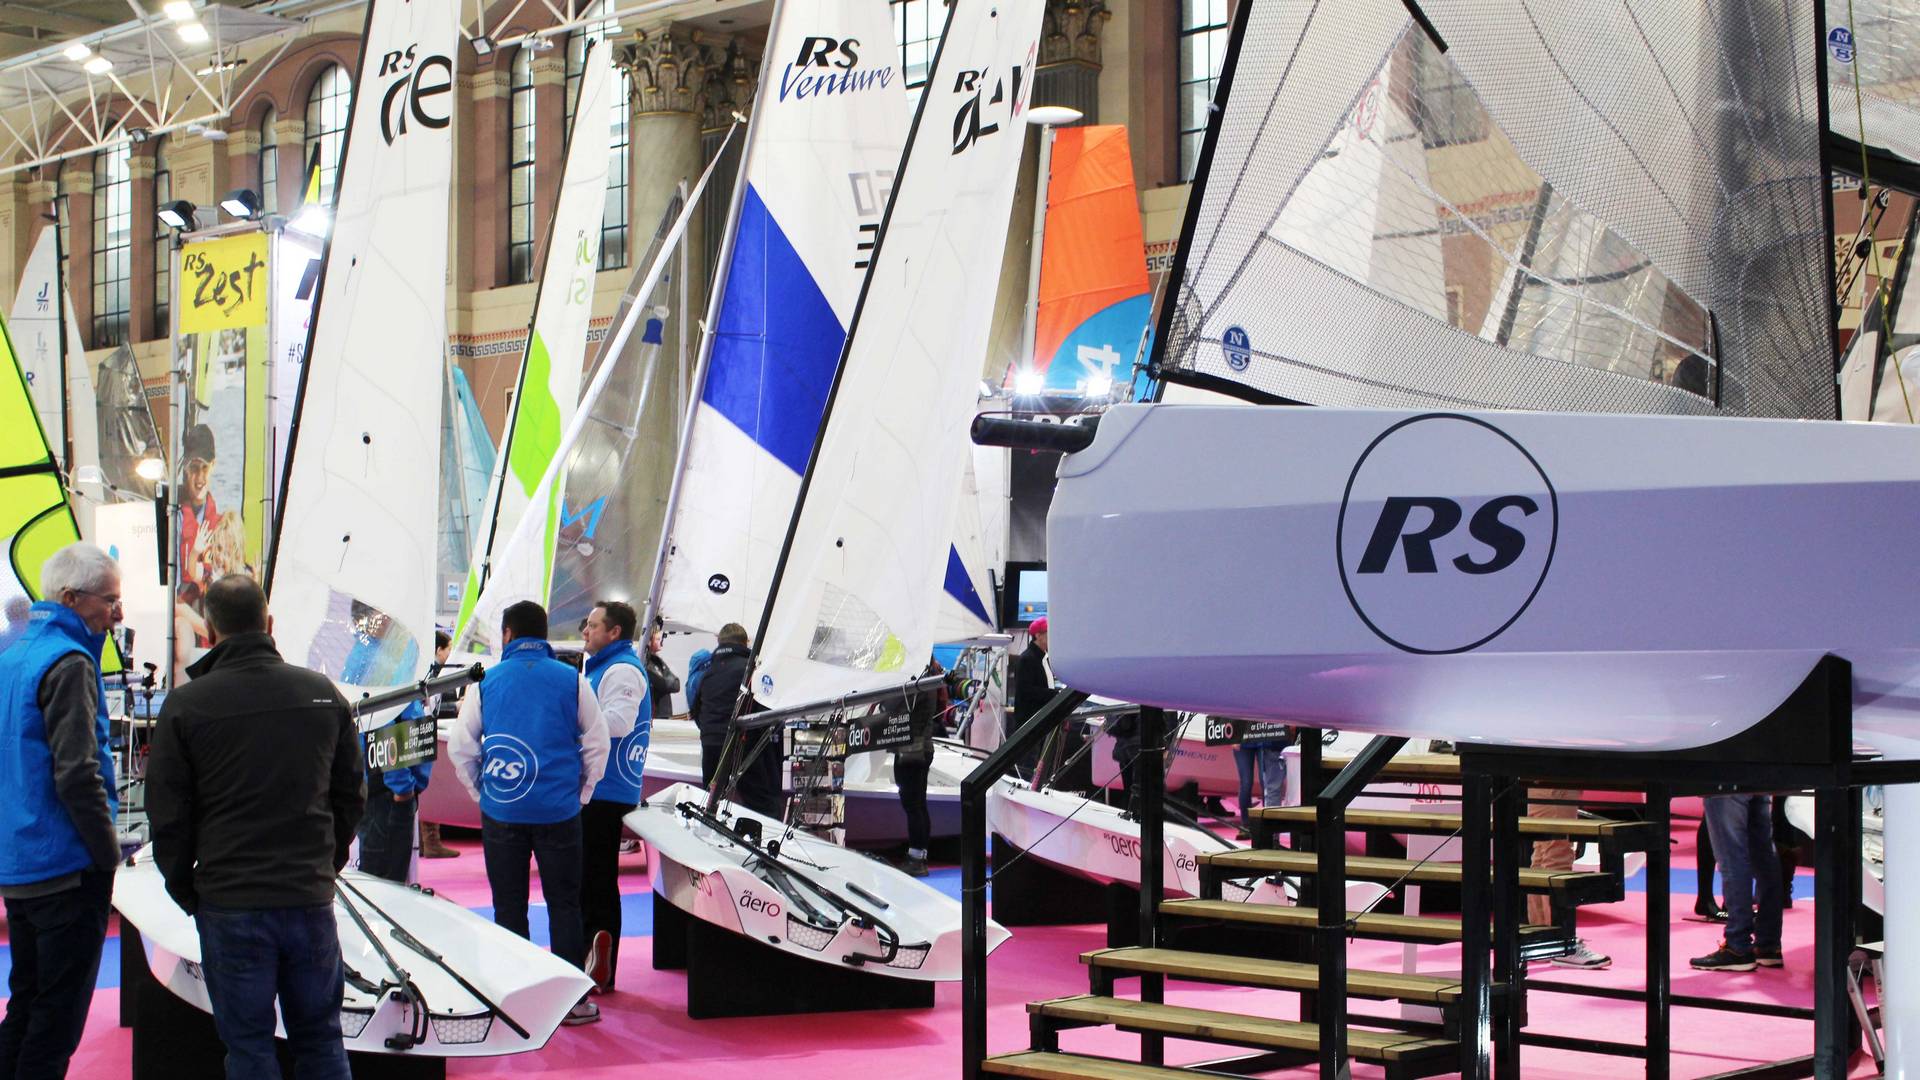 RS Sailing collaborate with Race Geek